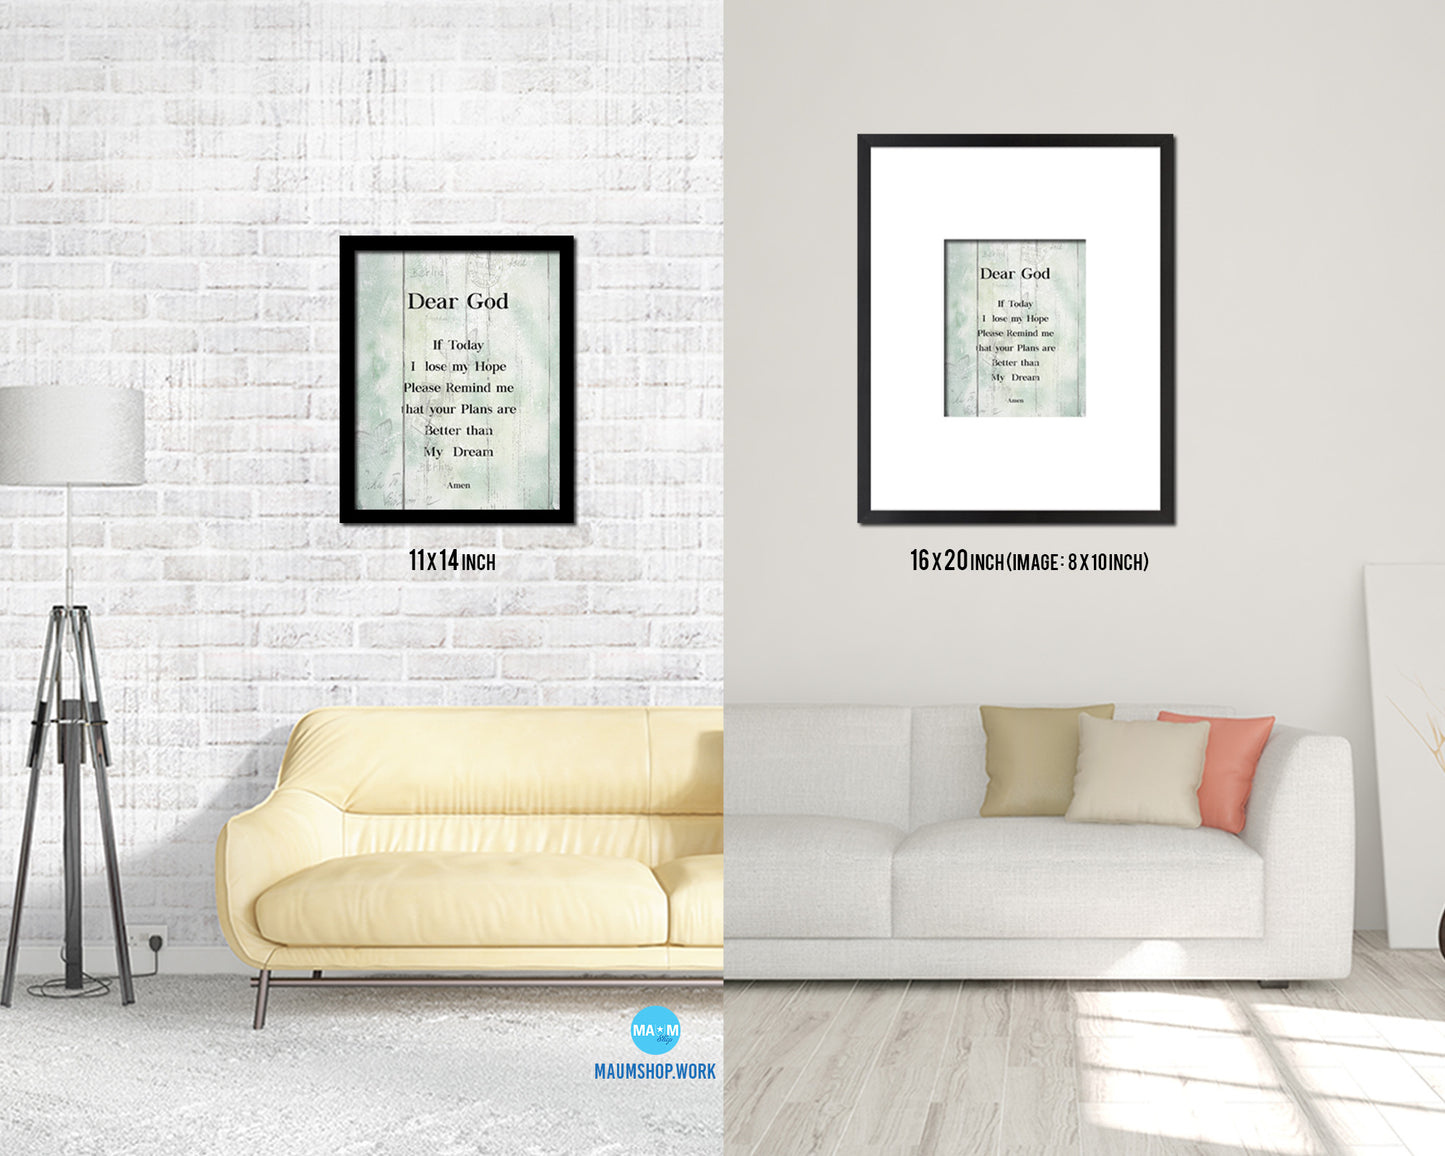 Dear God, if today I lose my hope please remind me Bible Verse Scripture Frame Print